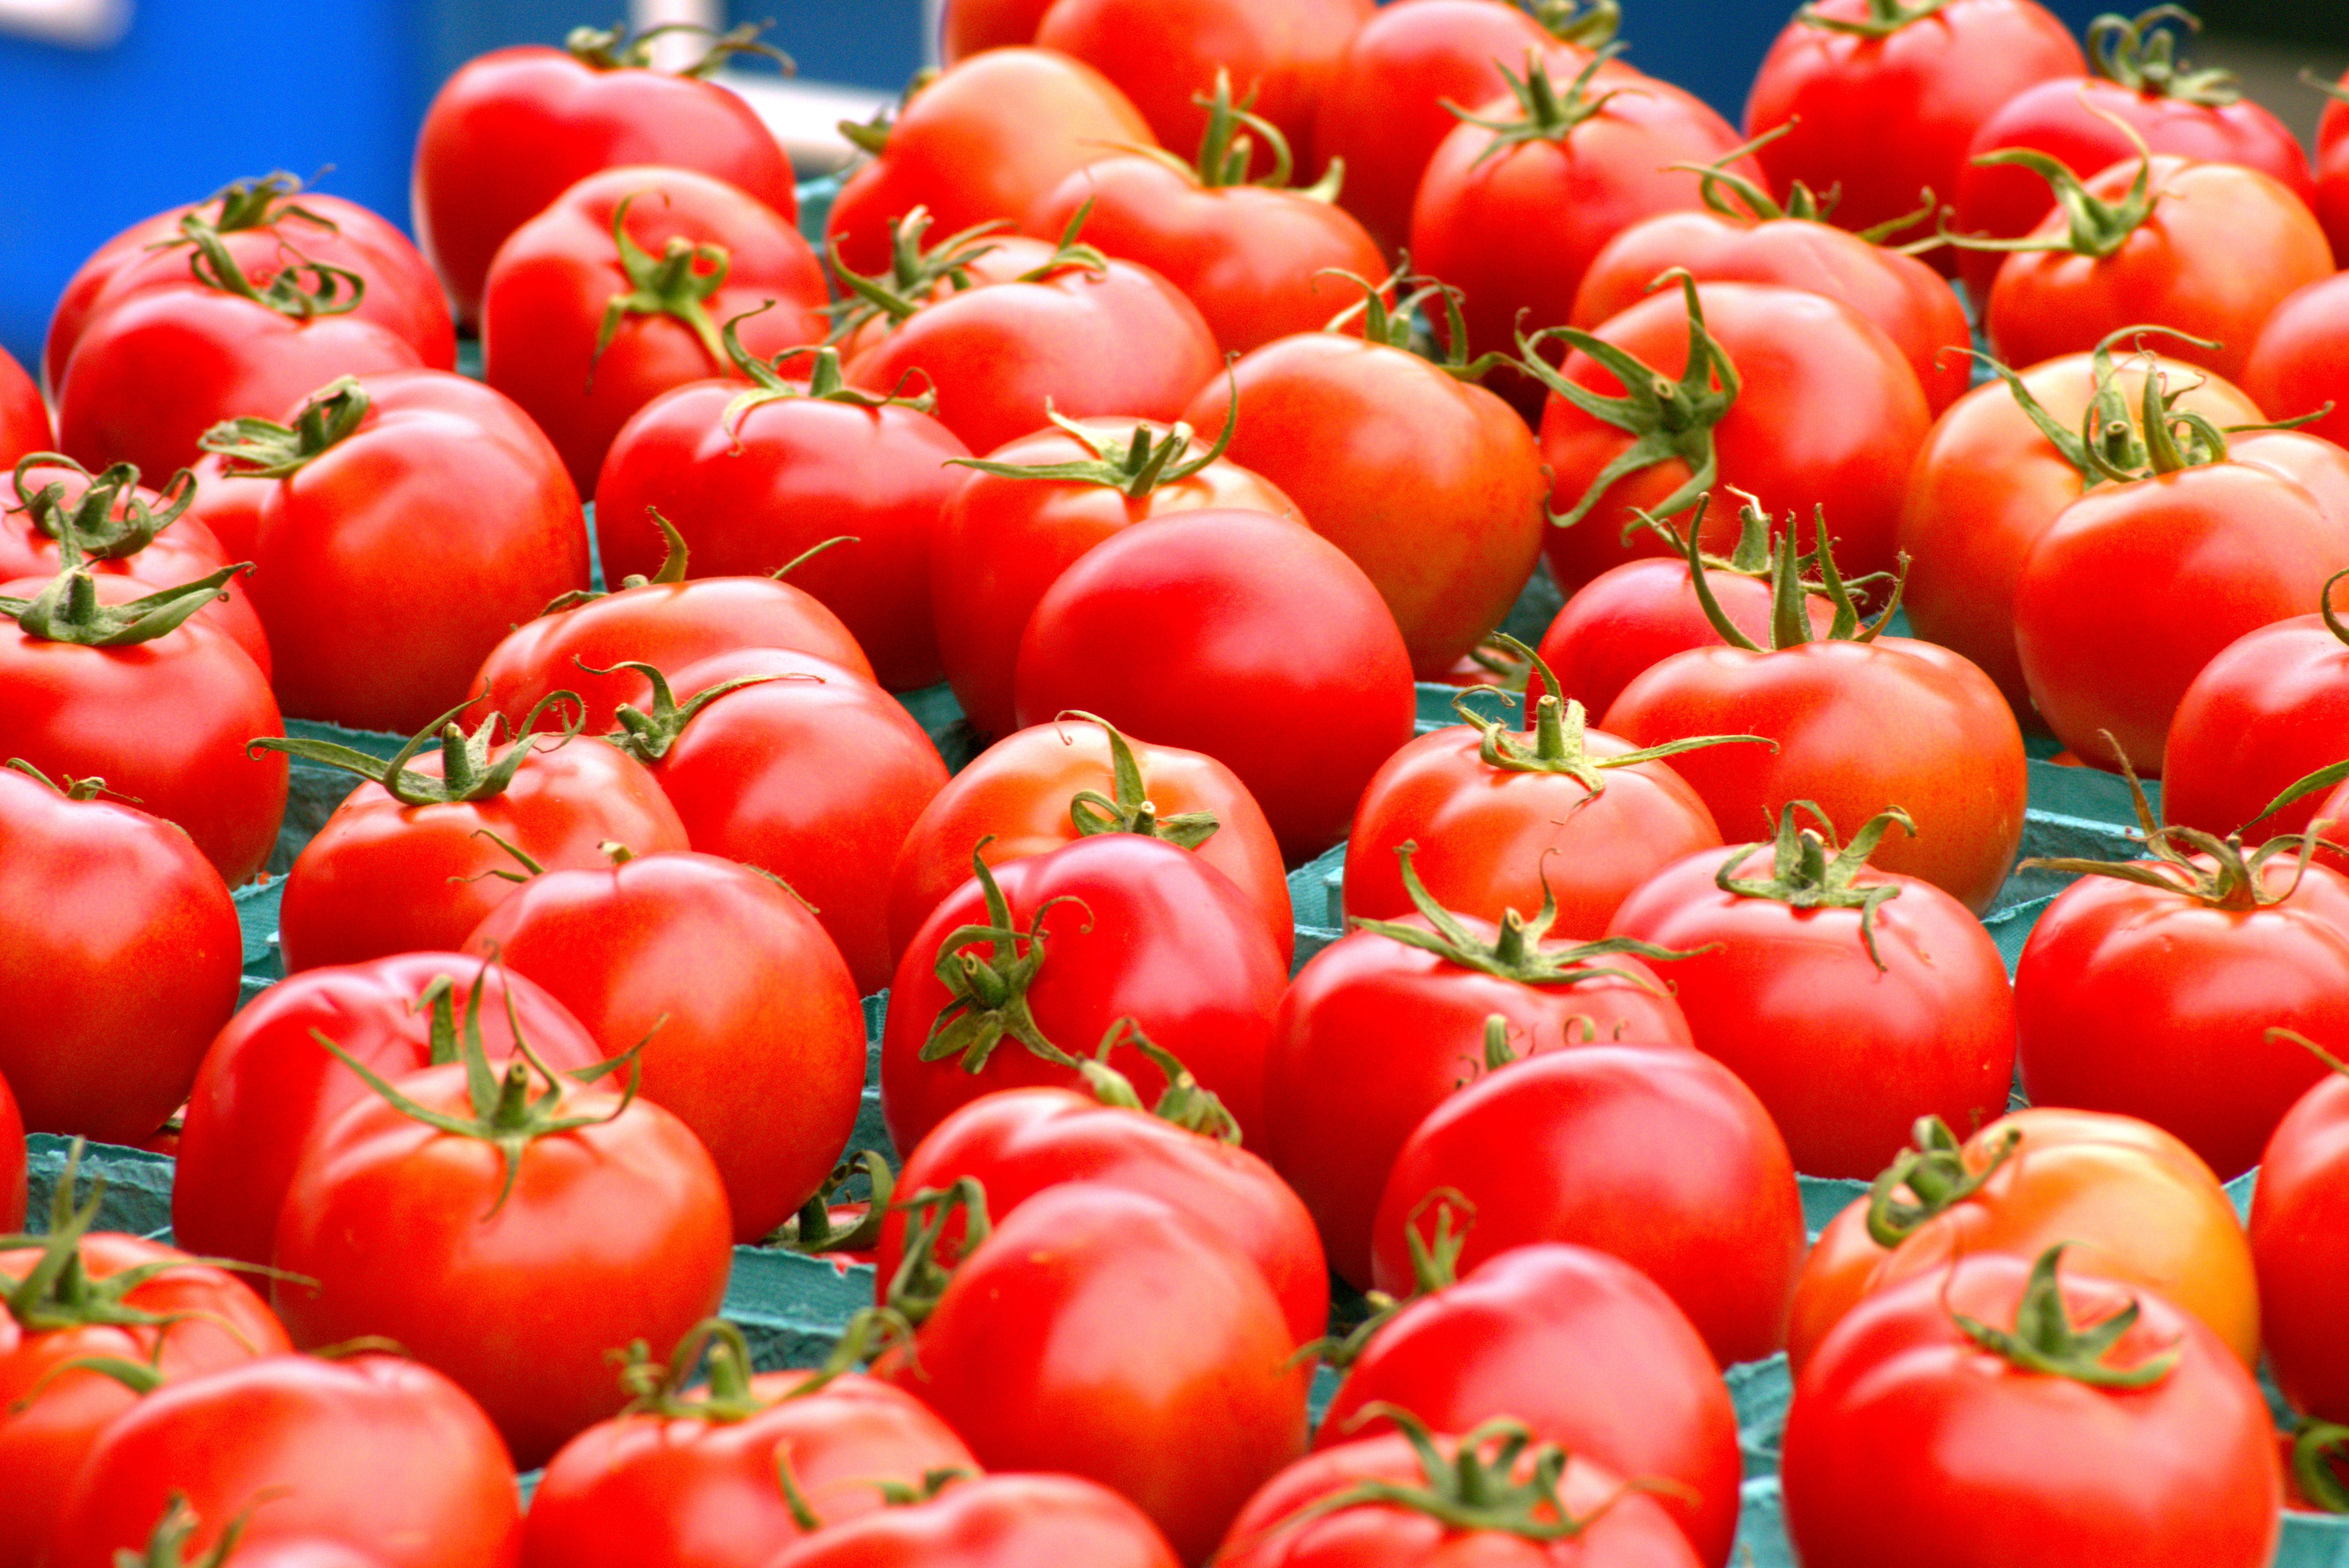 Featured image for “Florida Tomato Specialist: Promotions, Marketing Need to Improve”